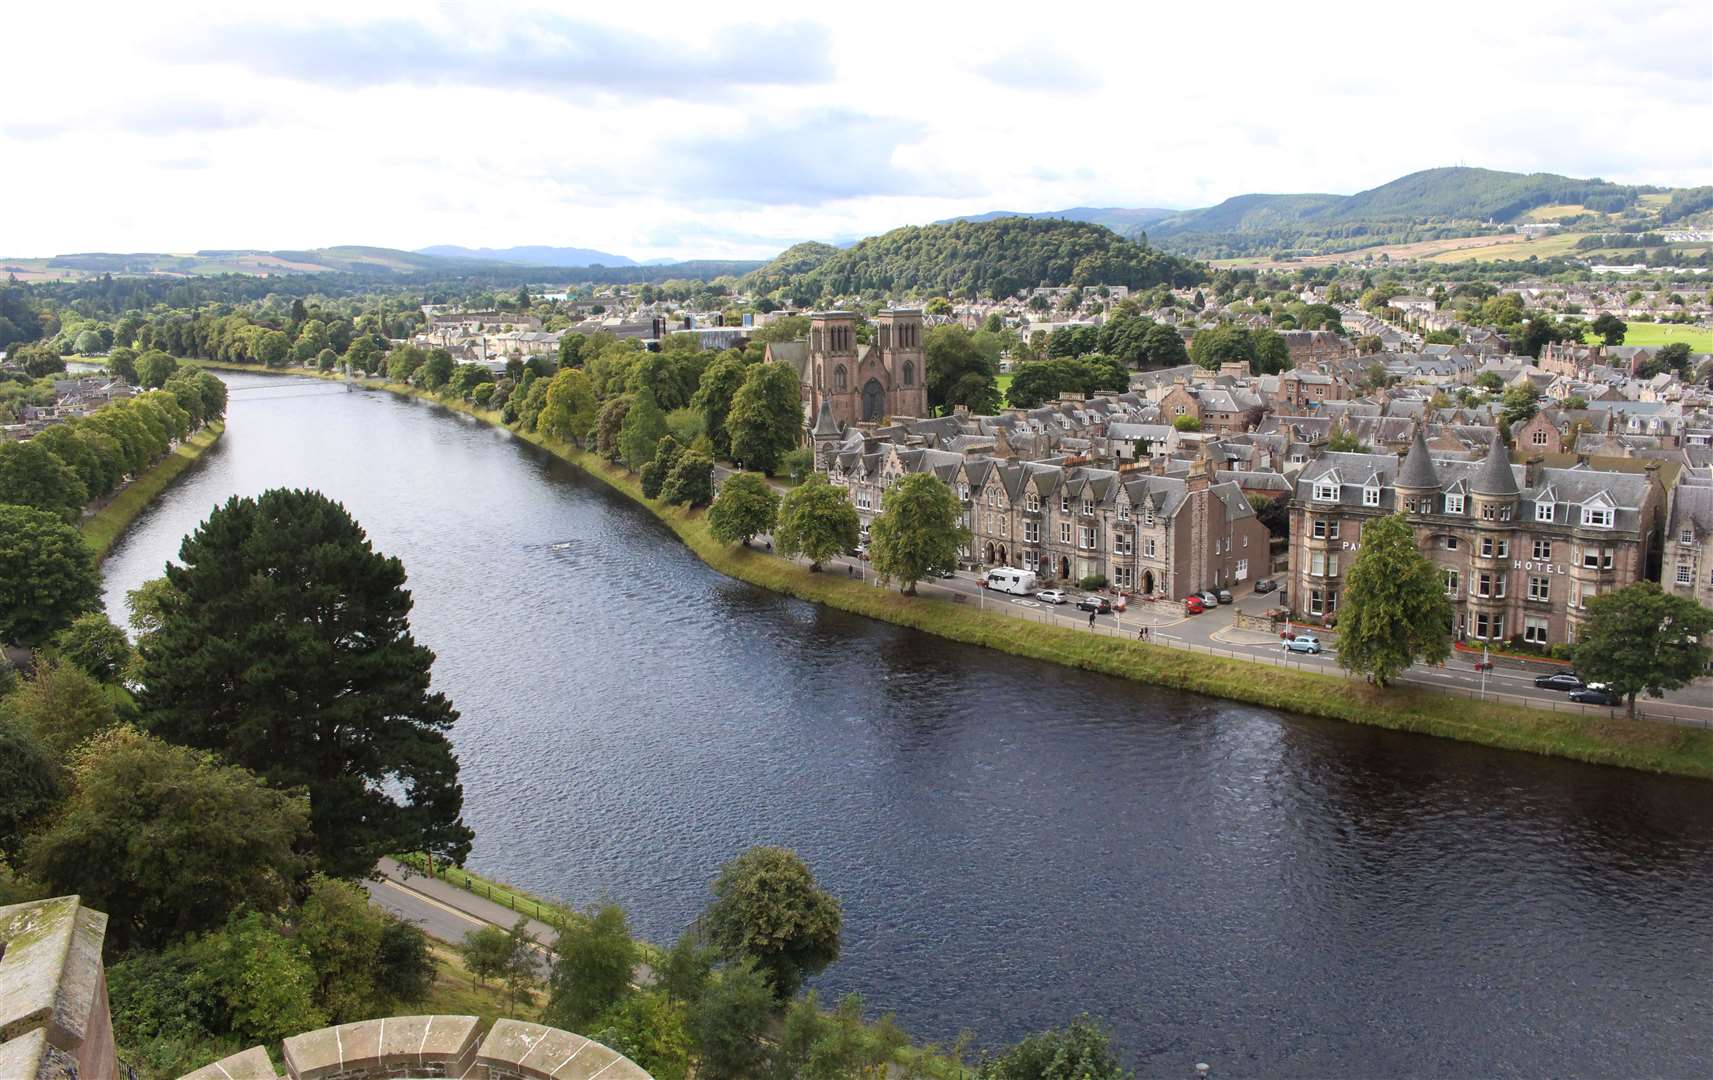 Funding is being spent mostly in Inverness, says Bill Mowat. Picture: Alan Hendry